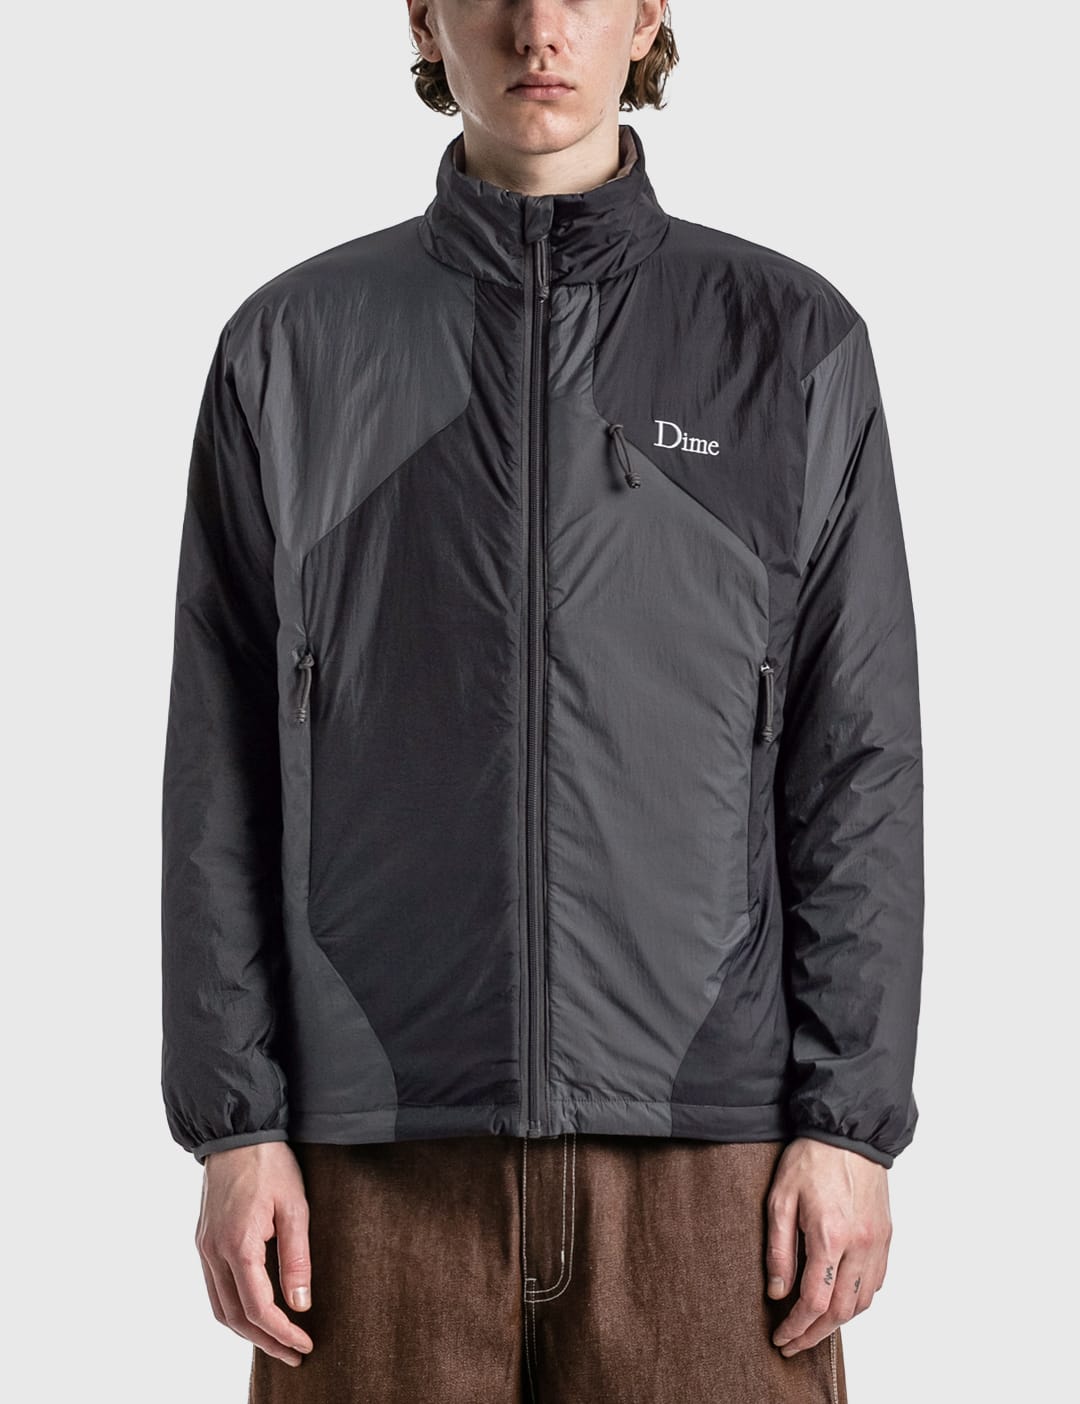 Dime - Lightweight Field Jacket | HBX - Globally Curated Fashion ...